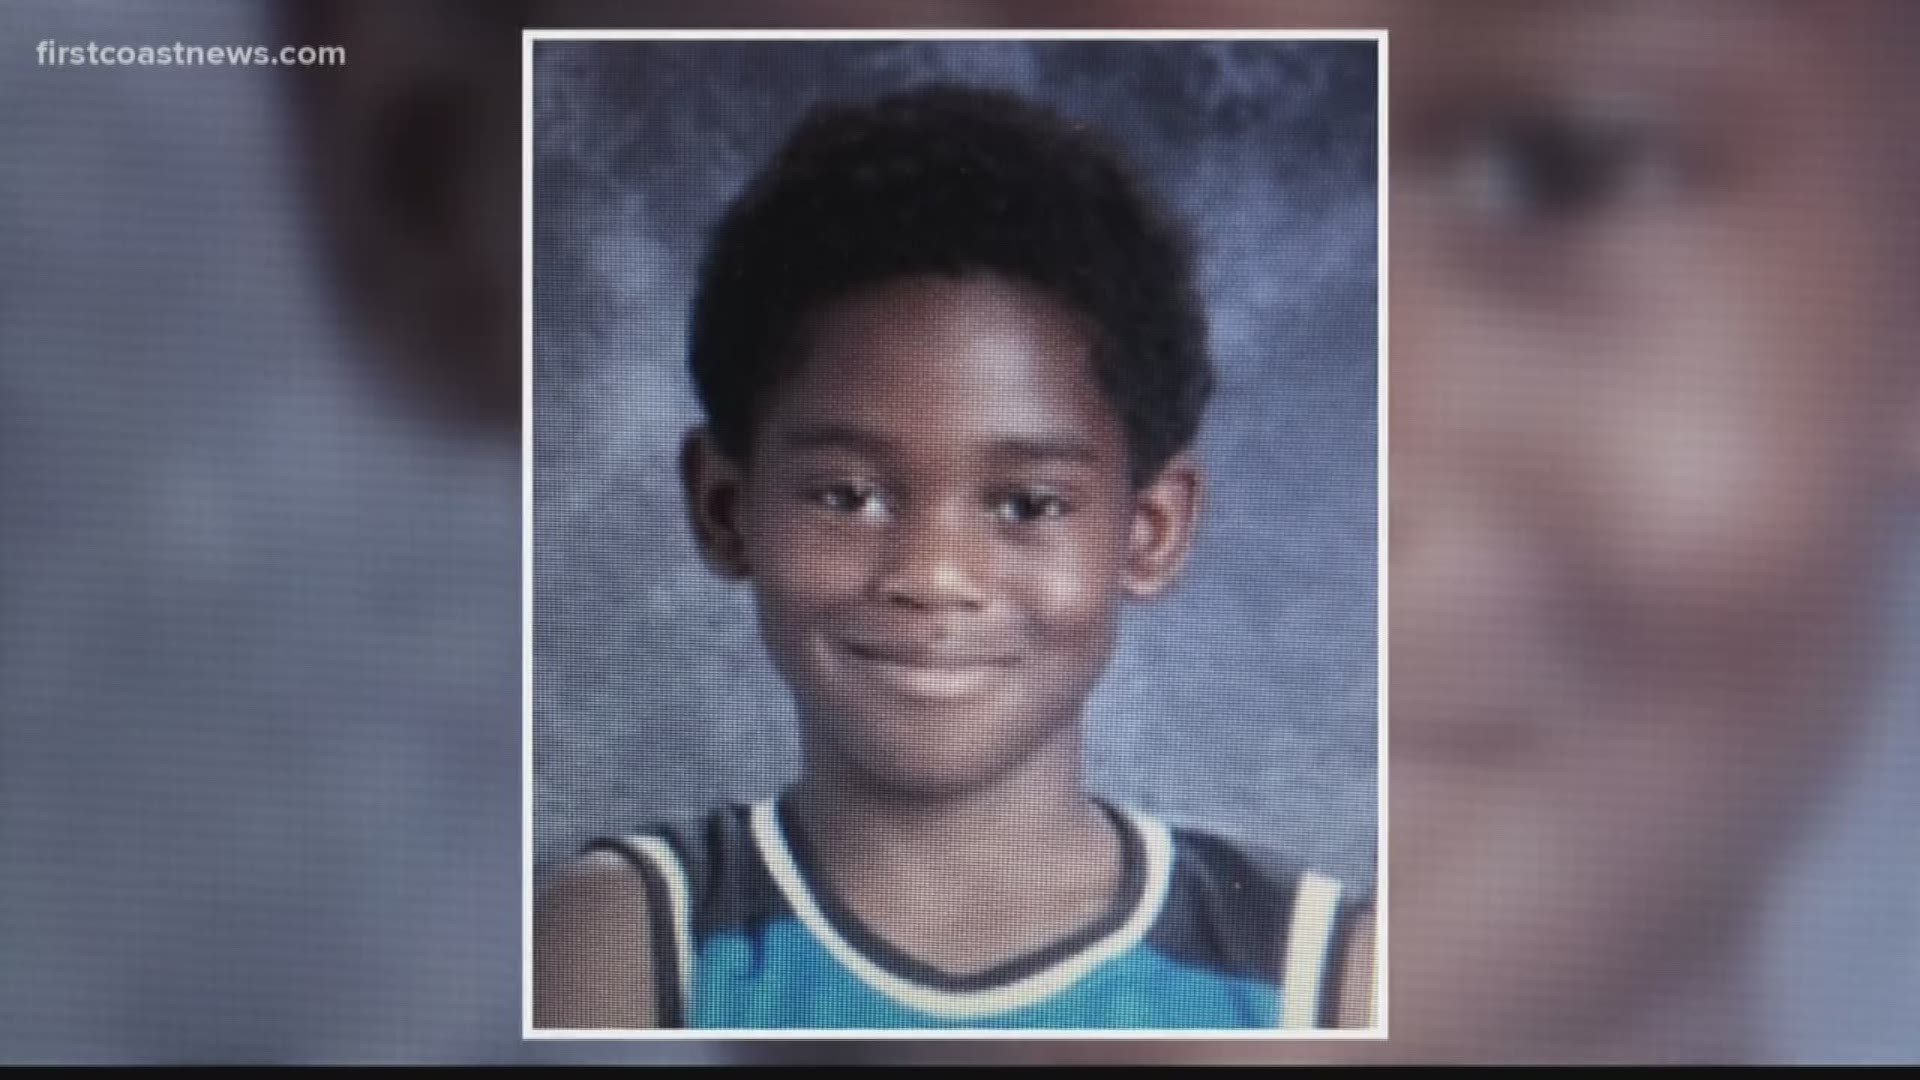 FDLE said that 10-year-old Cedric Barnes was last seen in the 200 block of Spencer Plantation Boulevard getting into a silver sedan.